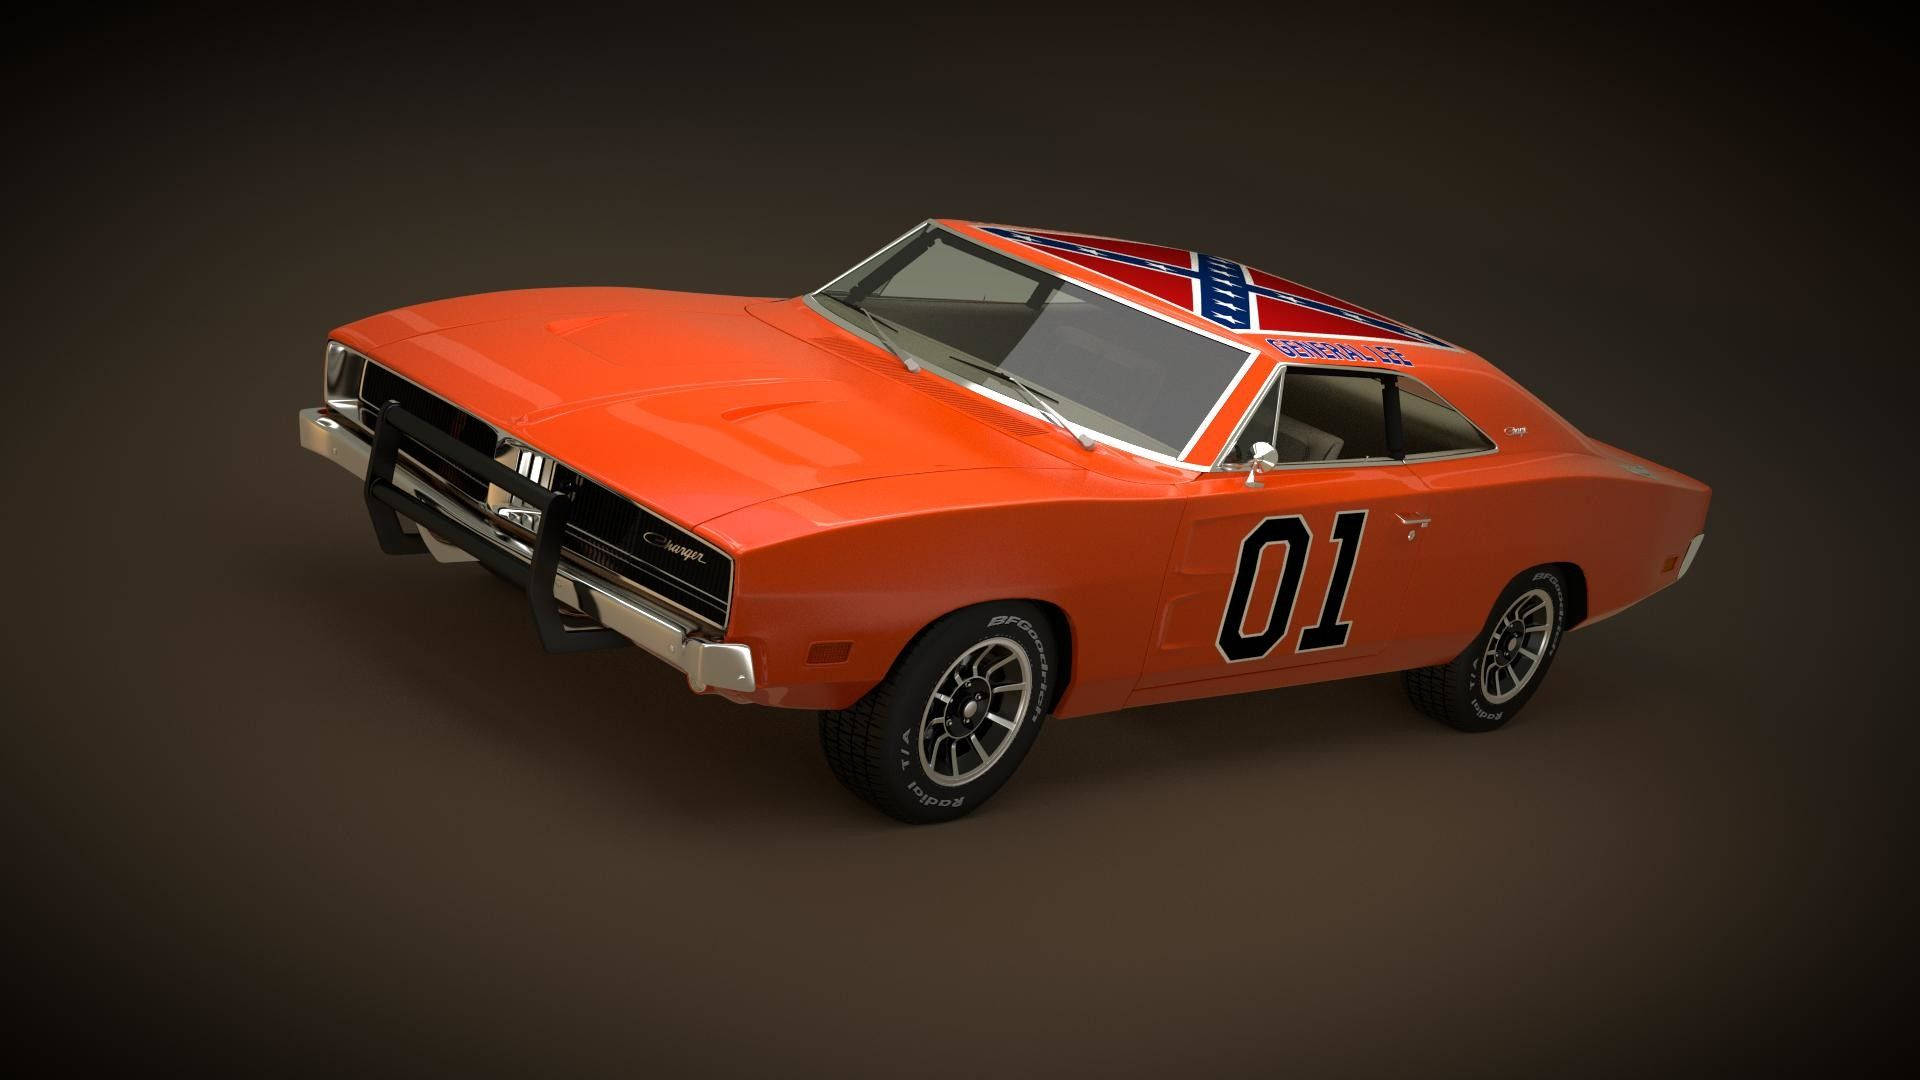 A 3d Model Of A Toy Car With A Confederate Flag On It Wallpaper